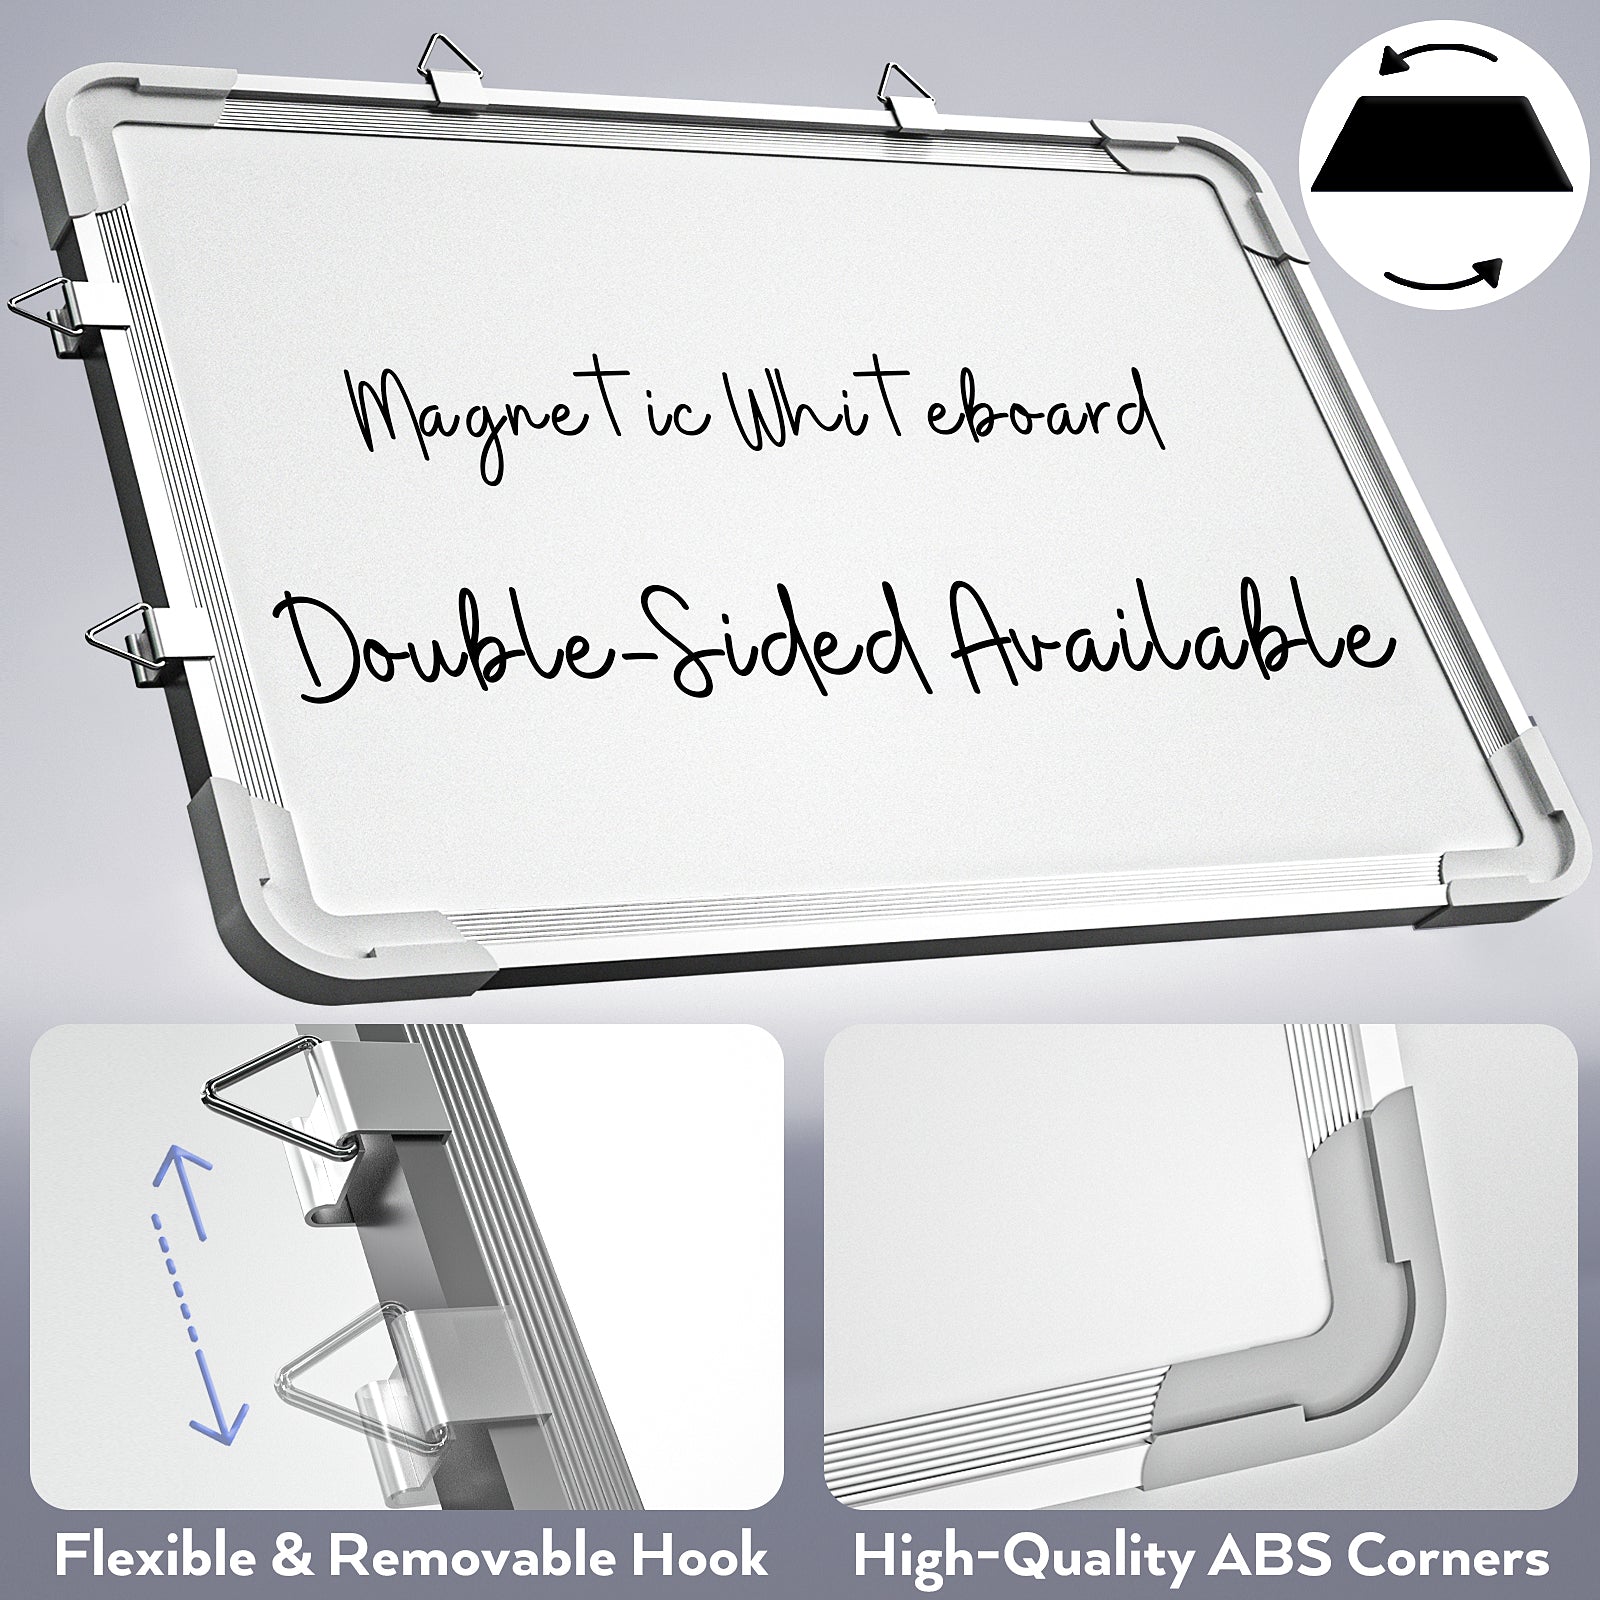  Dry Erase White Board - 12''x16'' Magnetic Large Desktop  Whiteboard with Stand, Portable Double-Sided White Board with 10 Markers, 4  Magnets, 1 Eraser, for Drawing/Memo/to Do List/Desk/School (Gold) : Office